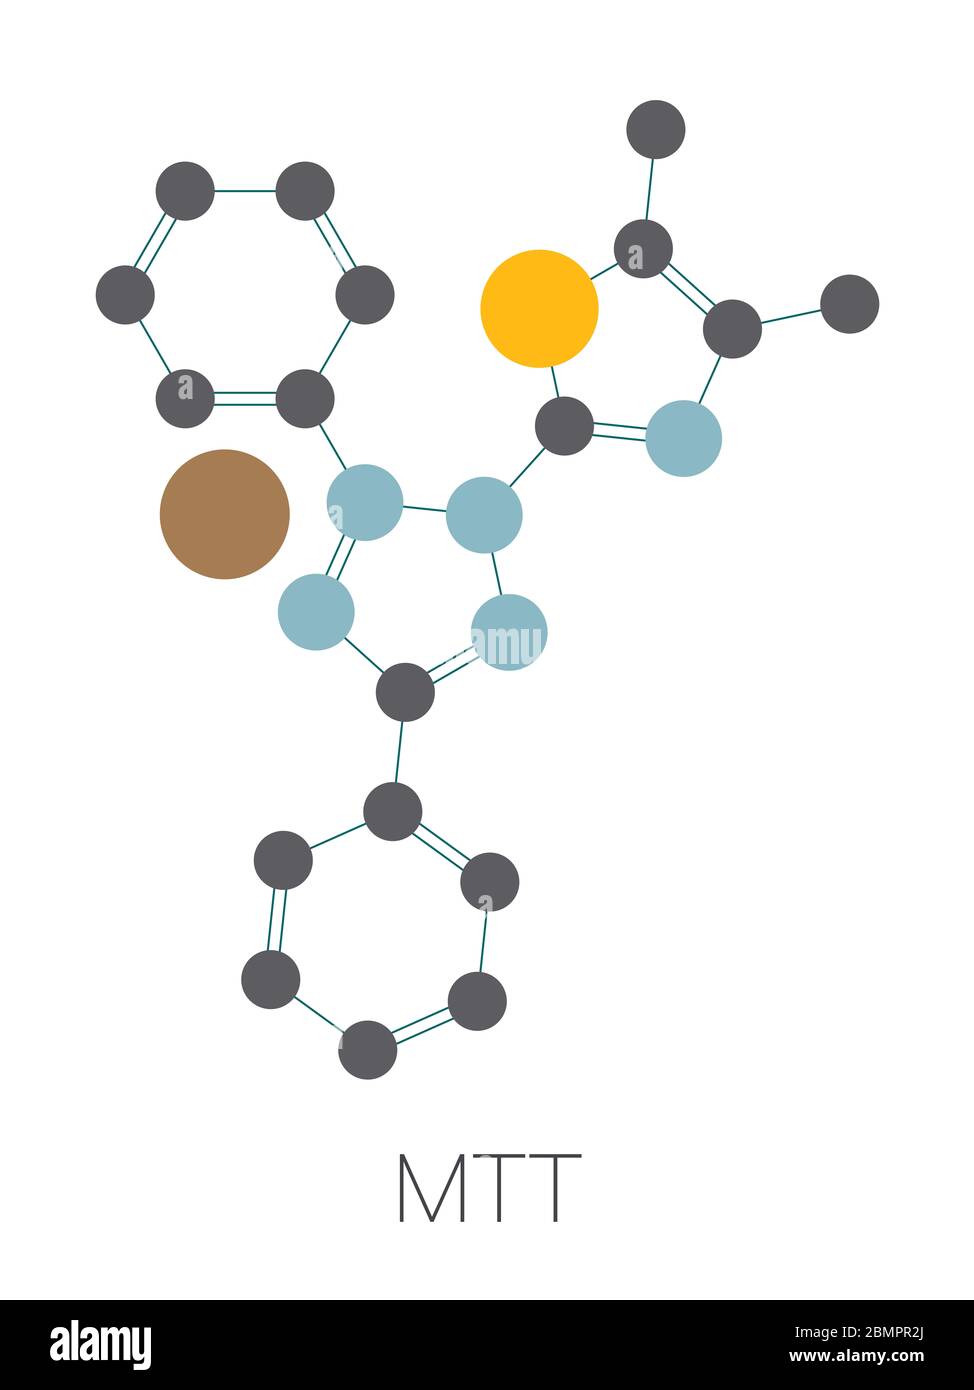 MTT yellow tetrazole dye molecule. Used in MTT assay, used to measure cytotoxicity and cell metabolic activity. Stylized skeletal formula (chemical structure): Atoms are shown as color-coded circles: hydrogen (hidden), carbon (grey), oxygen (red), nitrogen (blue), sulfur (yellow), bromine (brown). Stock Photo